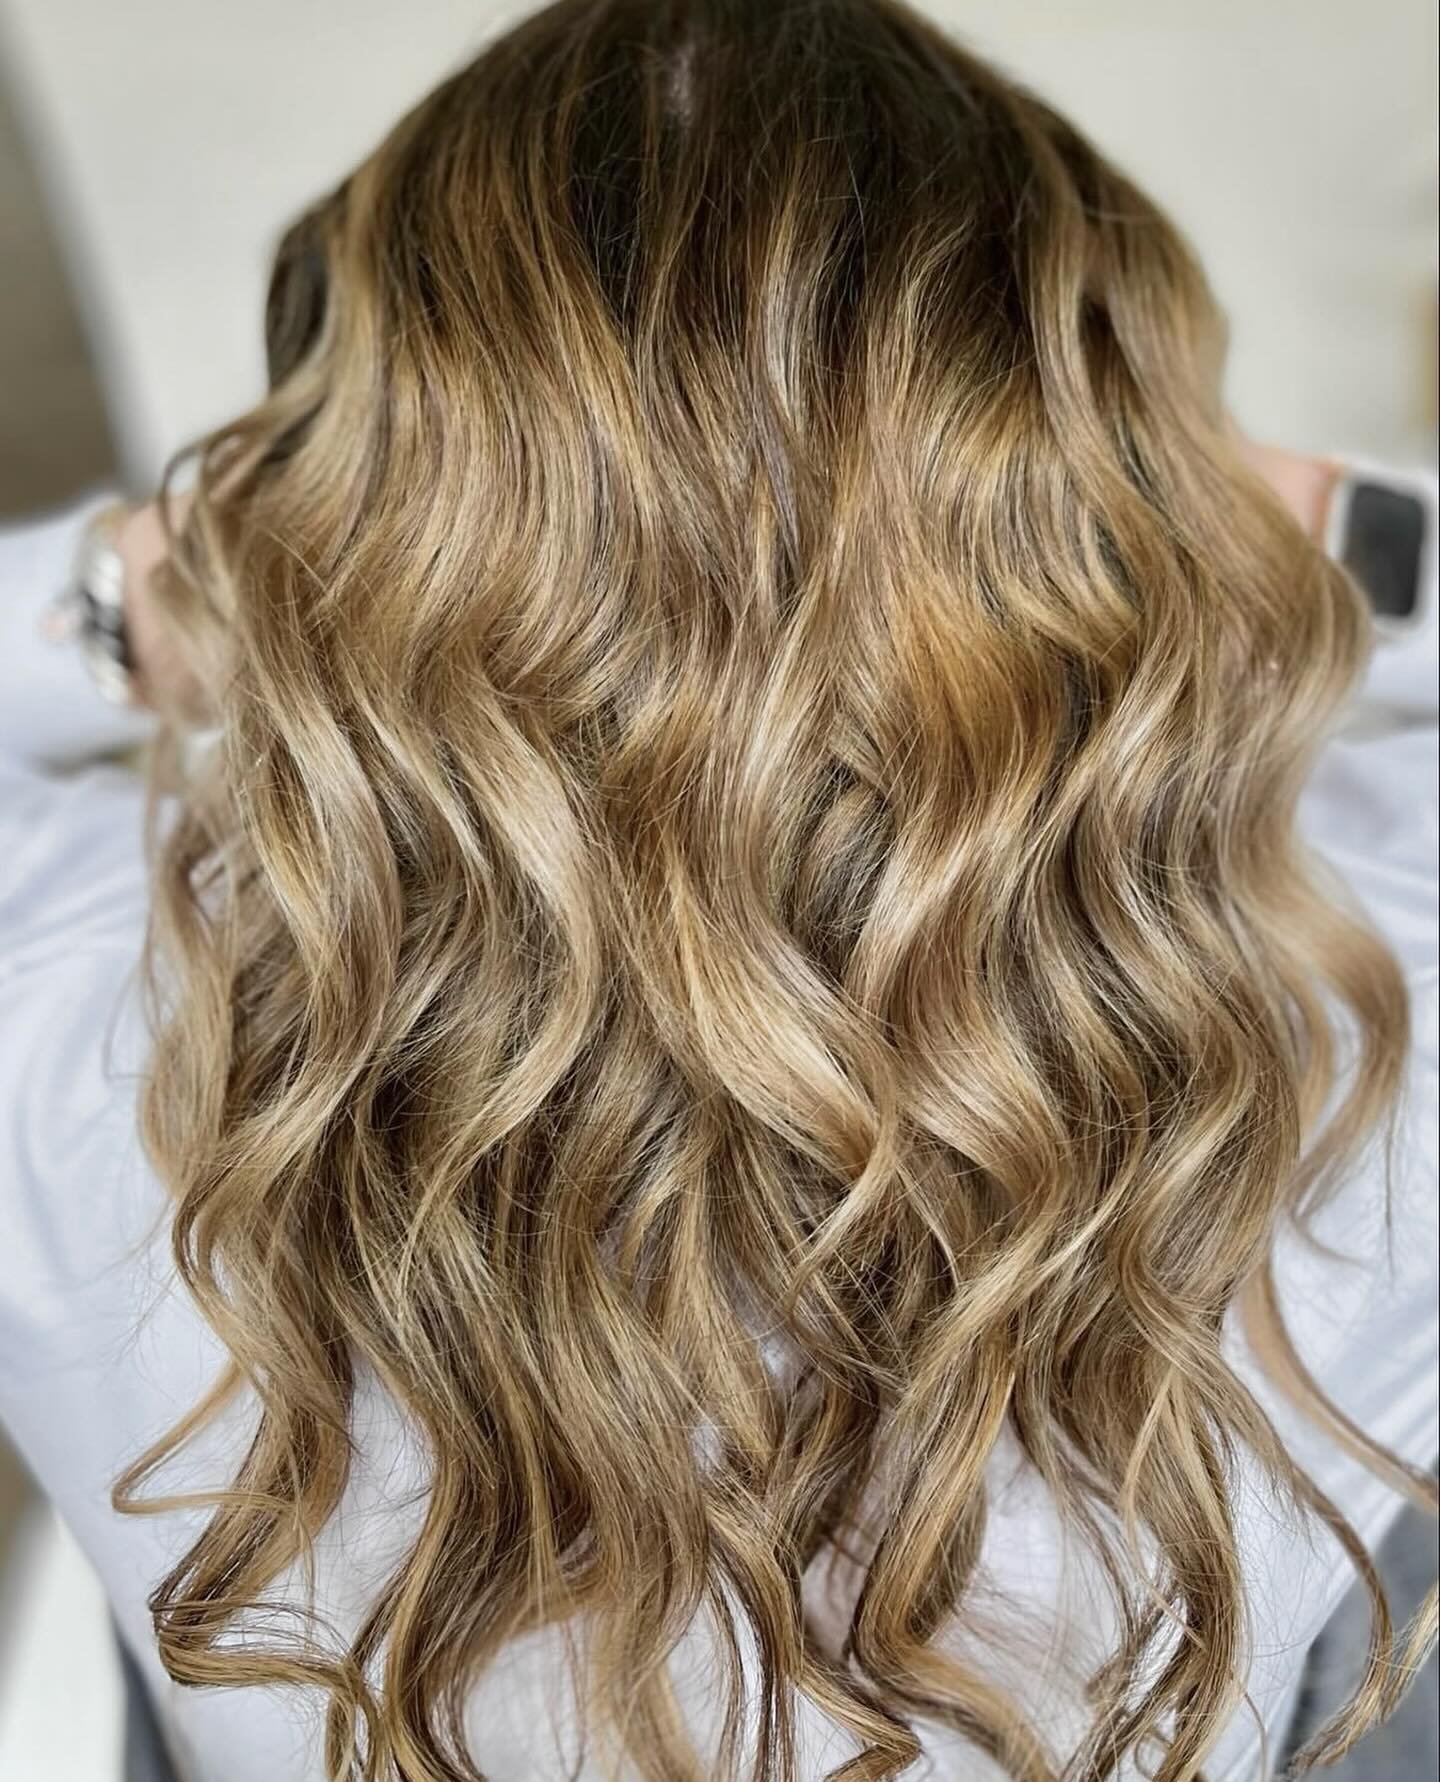 Monday Mood: Refresh &amp; Move up 🪡 
@unleashedbeauty__bychristina 

#nhextensions #nhextensionspecialist #nhextensionstylist #nhhairextensions #exeternhsalon #exeternhhairstylist #exeternhhaircut #exeternh #nh #hairextensionsalon #handtiedextensio